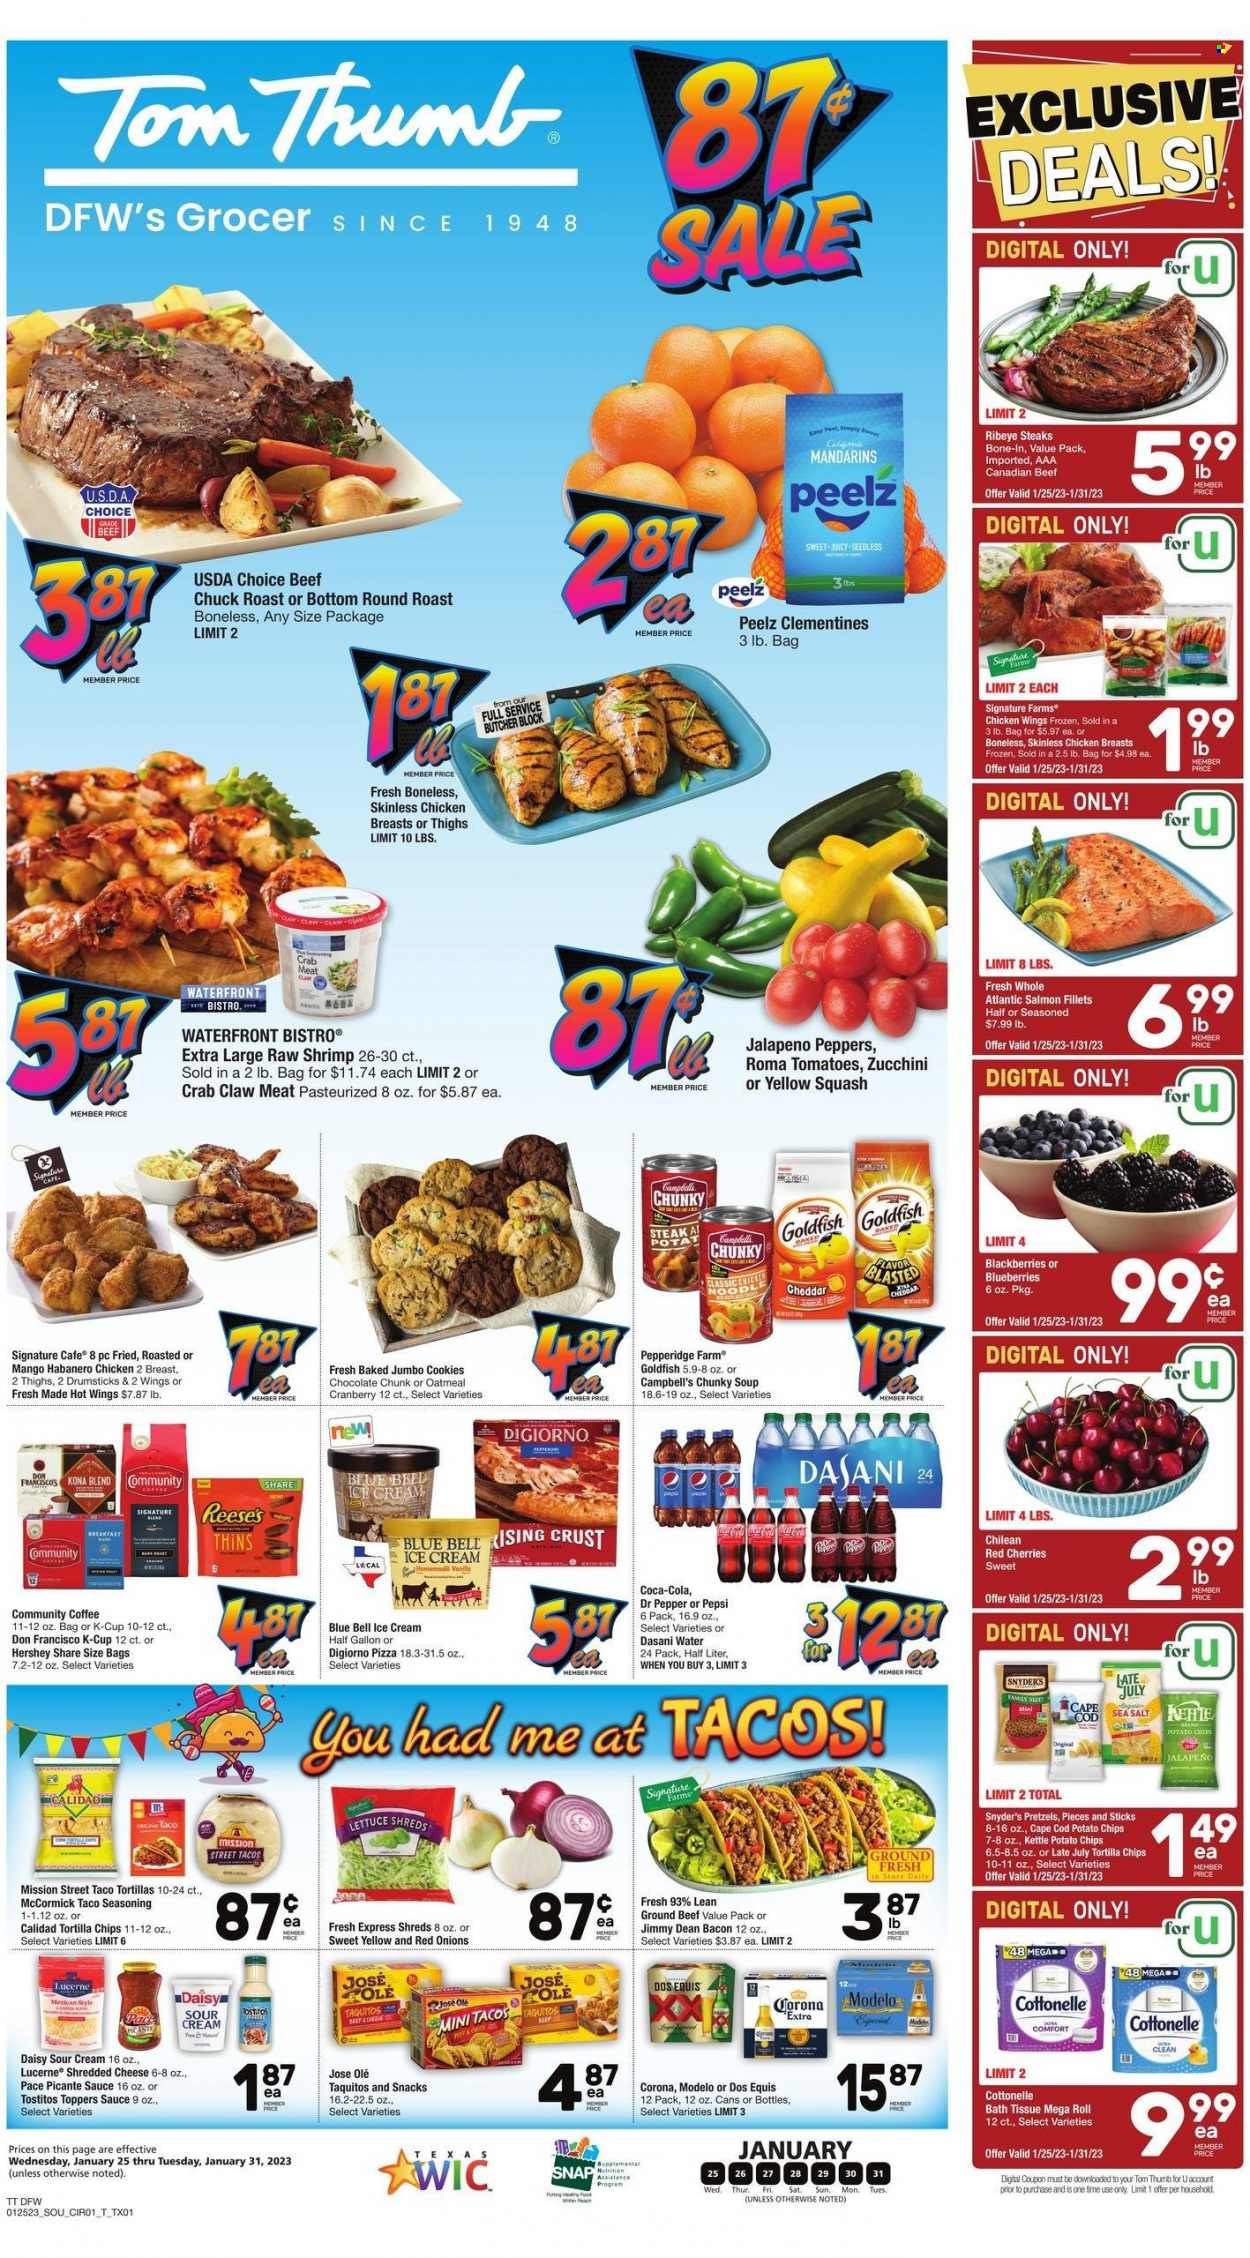 thumbnail - Tom Thumb Flyer - 01/25/2023 - 01/31/2023 - Sales products - pretzels, zucchini, lettuce, jalapeño, yellow squash, blackberries, blueberries, mandarines, cherries, cod, crab meat, salmon, salmon fillet, crab, shrimps, Campbell's, pizza, soup, sauce, noodles, habanero chicken, taquitos, Jimmy Dean, bacon, shredded cheese, sour cream, ice cream, Reese's, Blue Bell, chicken wings, cookies, tortilla chips, potato chips, Thins, Goldfish, Tostitos, oatmeal, spice, Coca-Cola, Pepsi, Dr. Pepper, coffee, coffee capsules, K-Cups, beer, Corona Extra, Modelo, chicken breasts, beef meat, ground beef, steak, round roast, chuck roast, ribeye steak, bath tissue, Cottonelle, clementines, Dos Equis. Page 1.